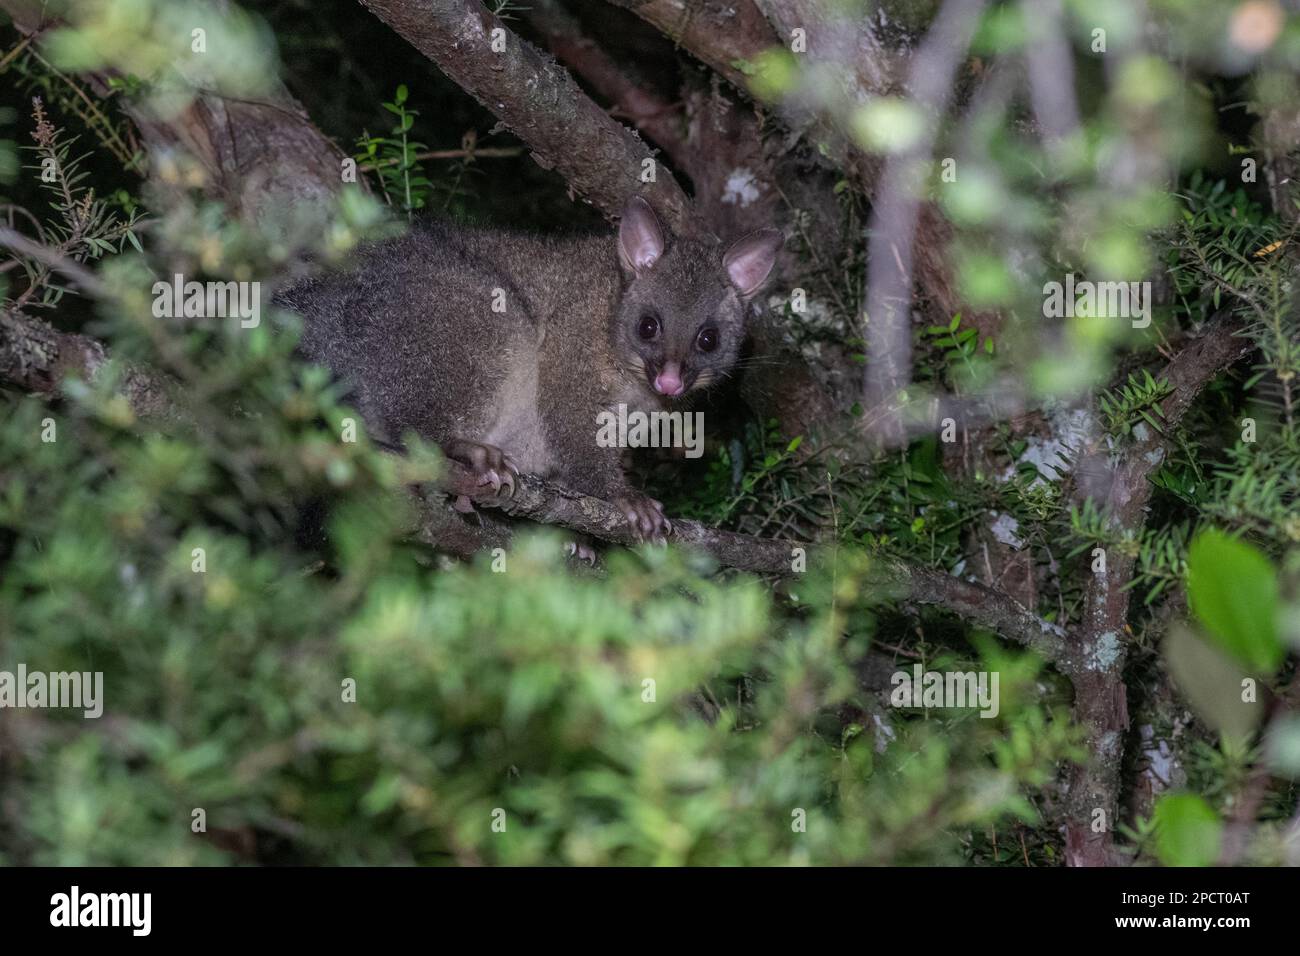 A common brushtail possum (Trichosurus vulpecula) an invasive species introduced to Aotearoa New Zealand. Stock Photo